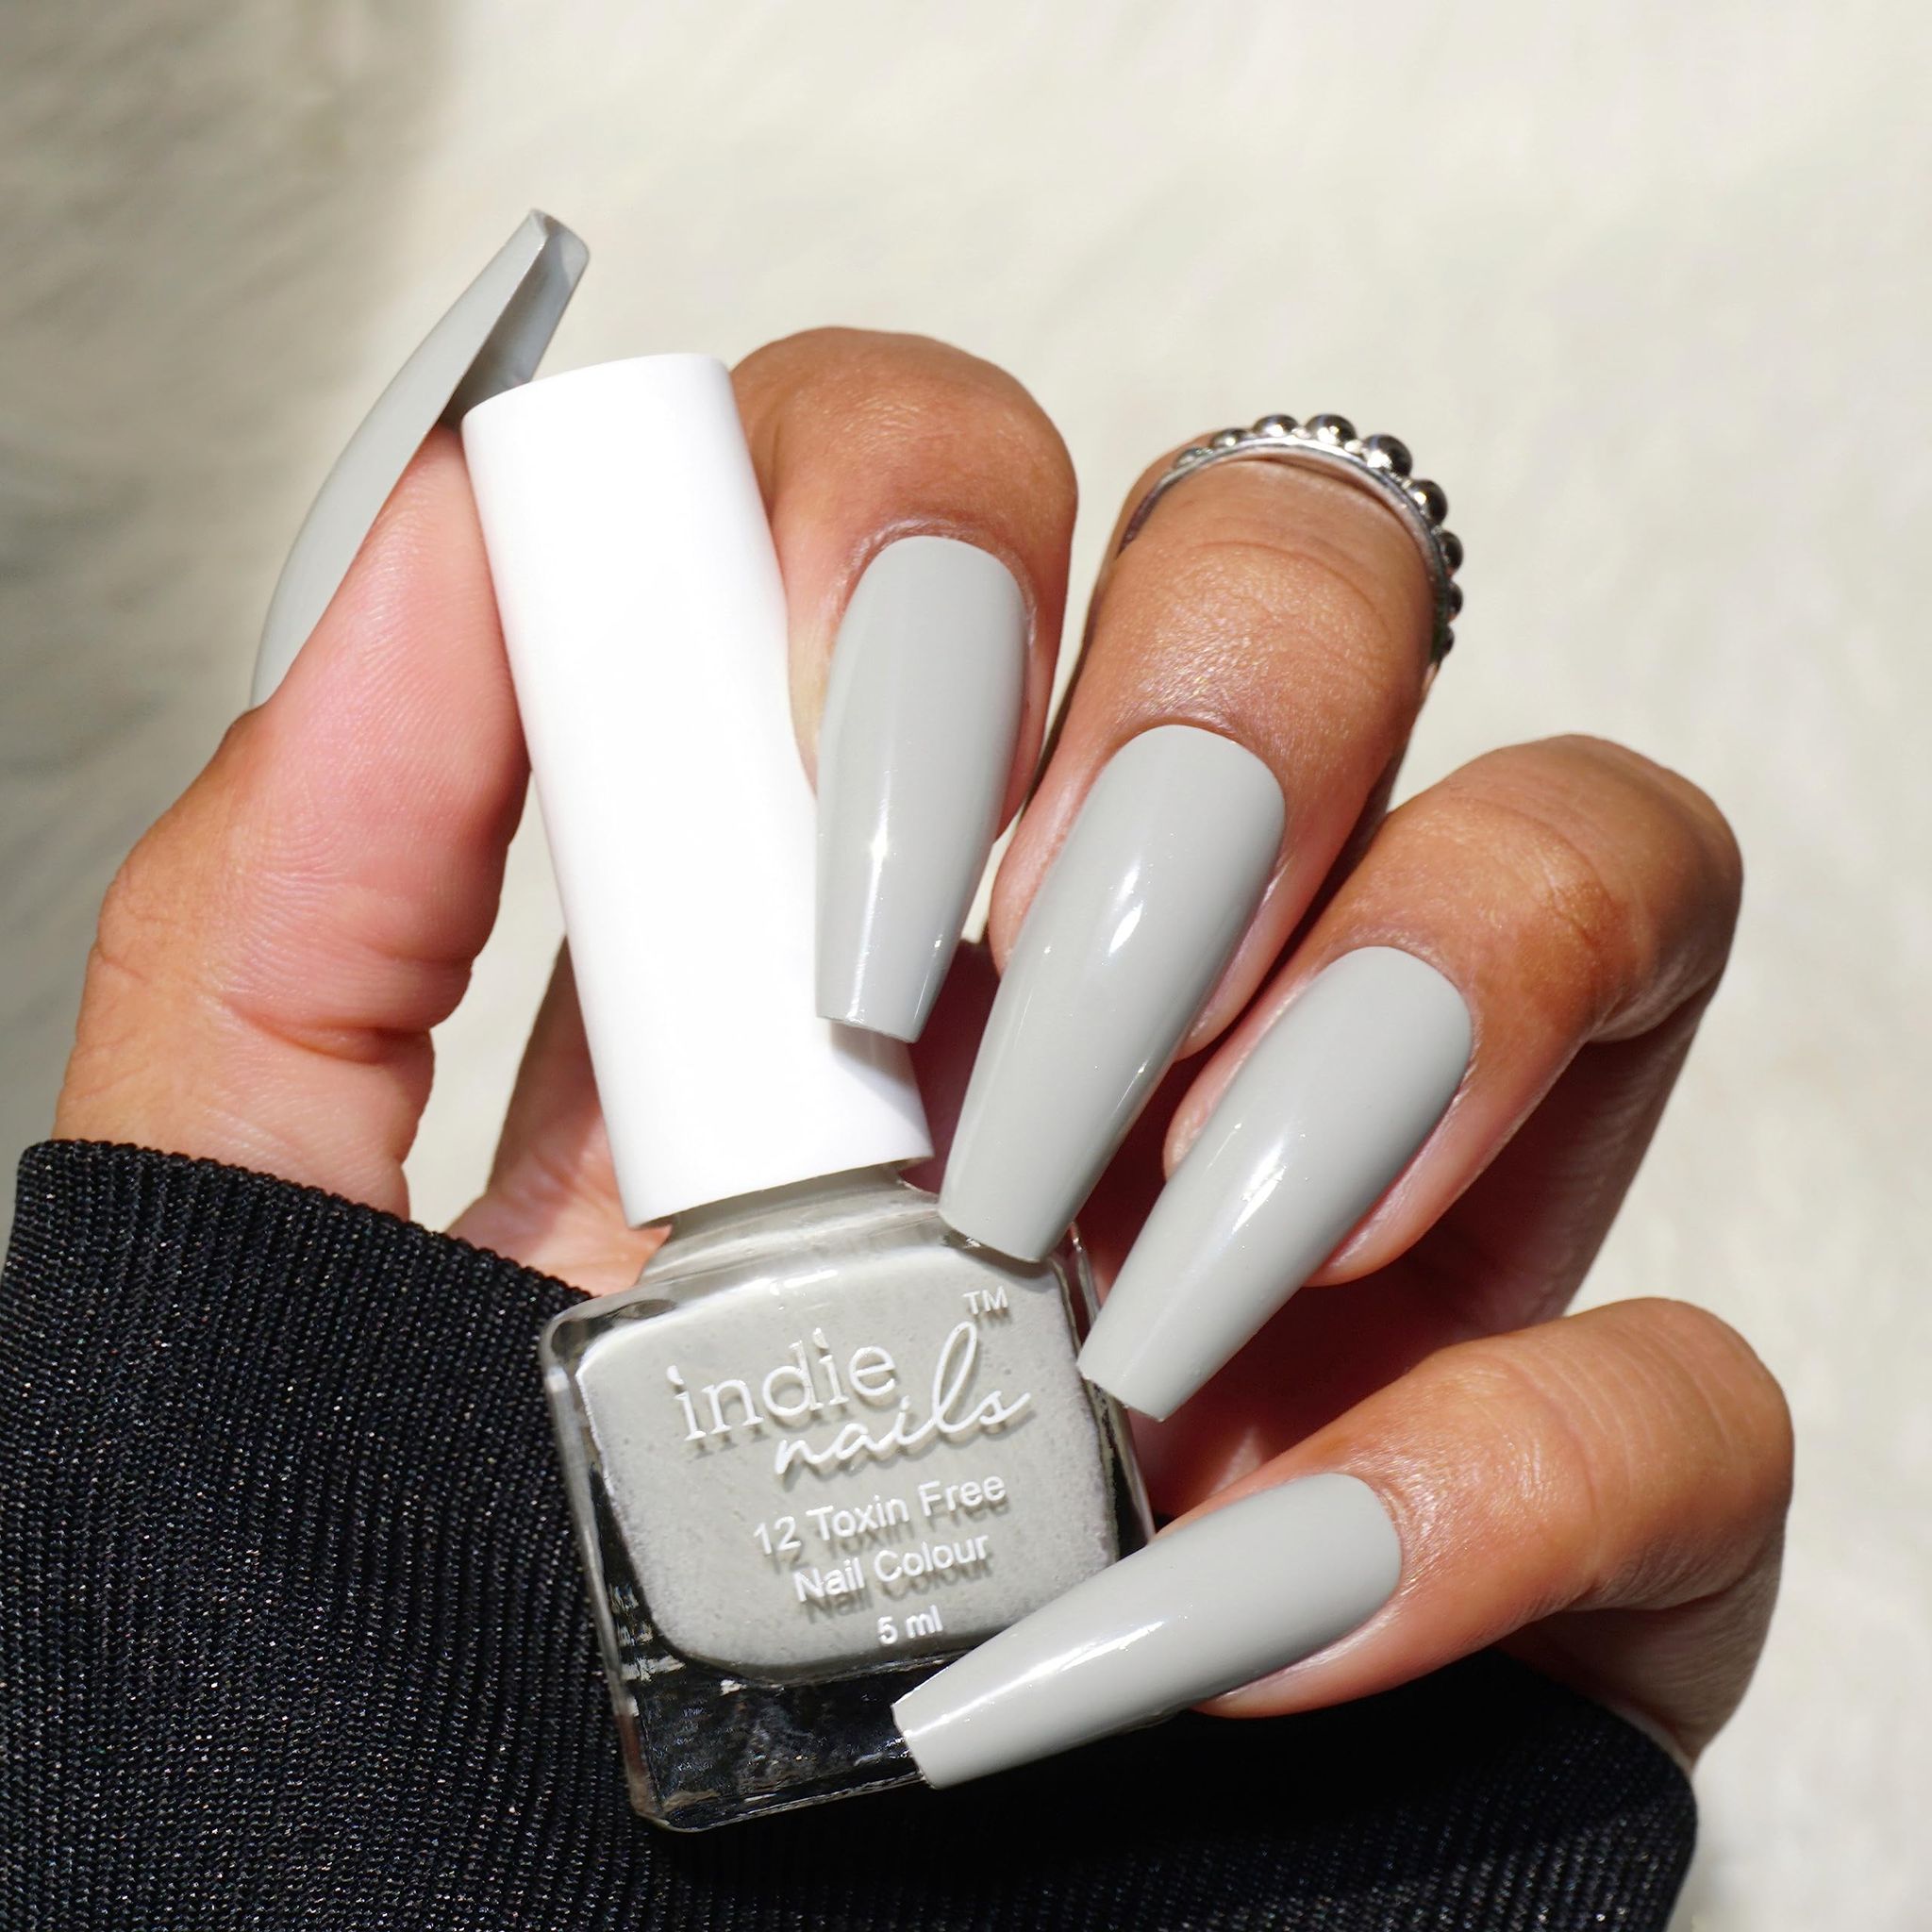 Indie Nails Concrete Plan is Free of 12 toxins vegan cruelty-free quick dry glossy finish chip resistant. Grey shade Nail polish, enamel, lacquer, paint Liquid: 5 ml